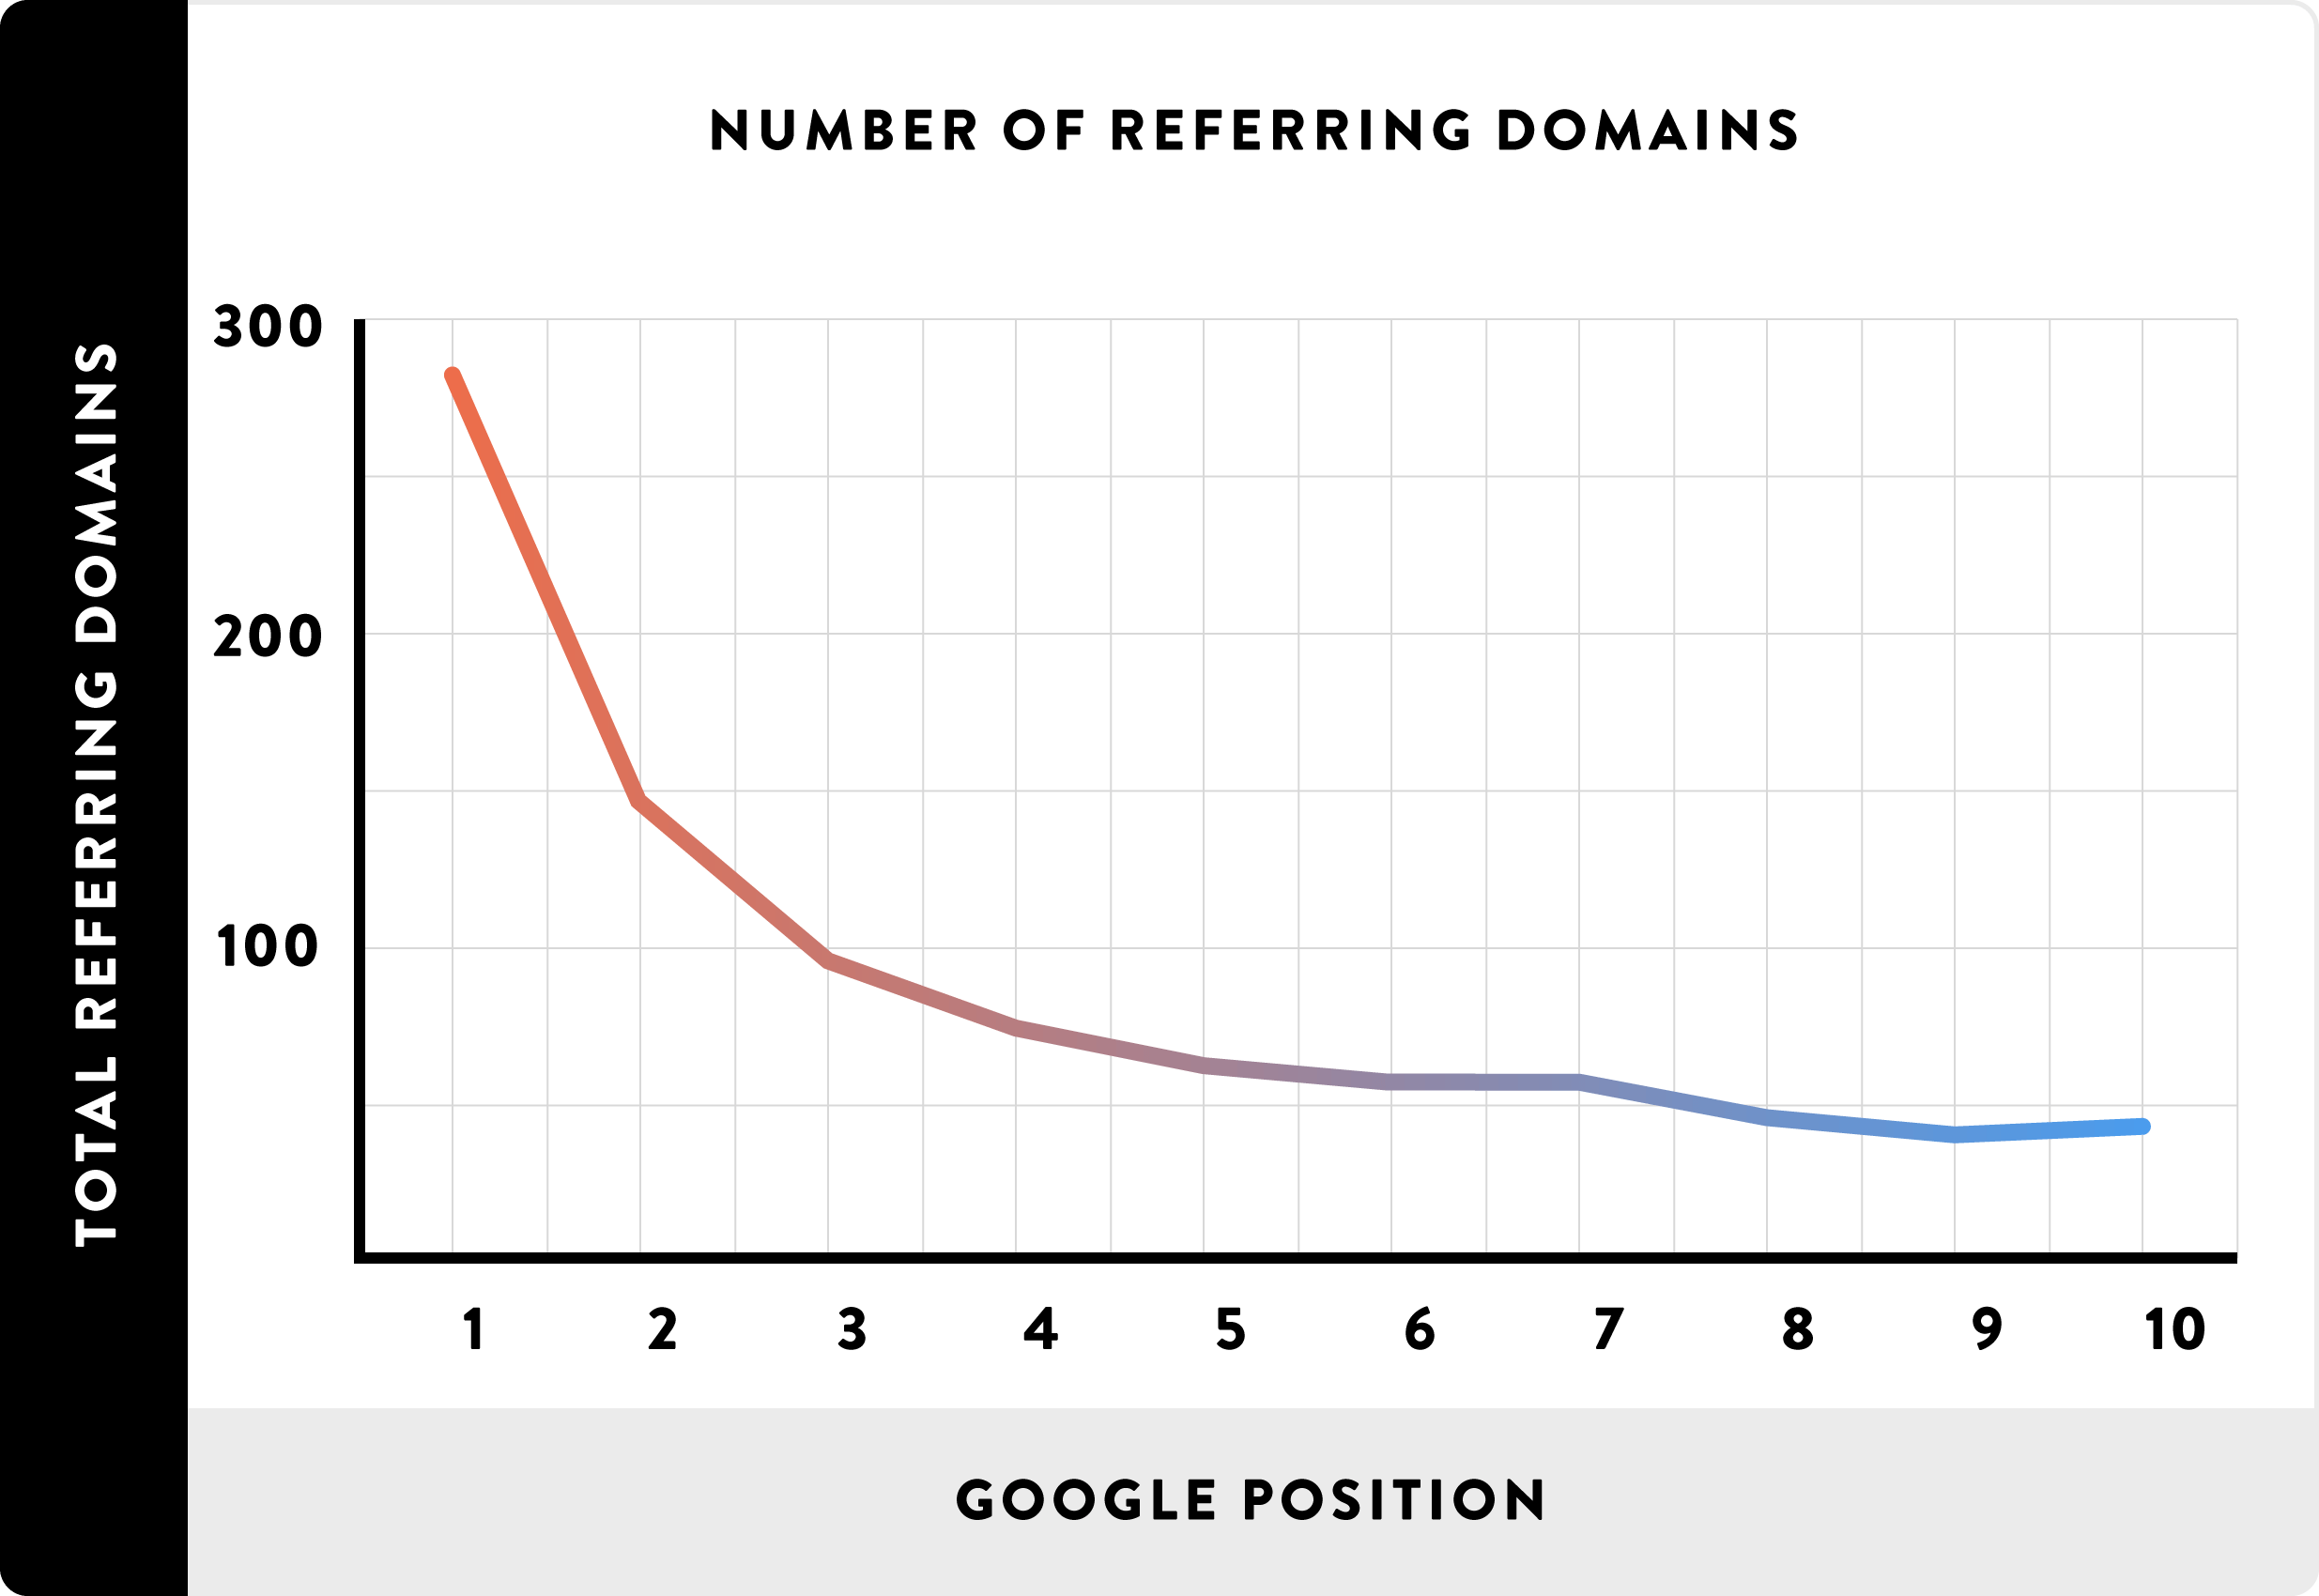 Number of Referring Domains line